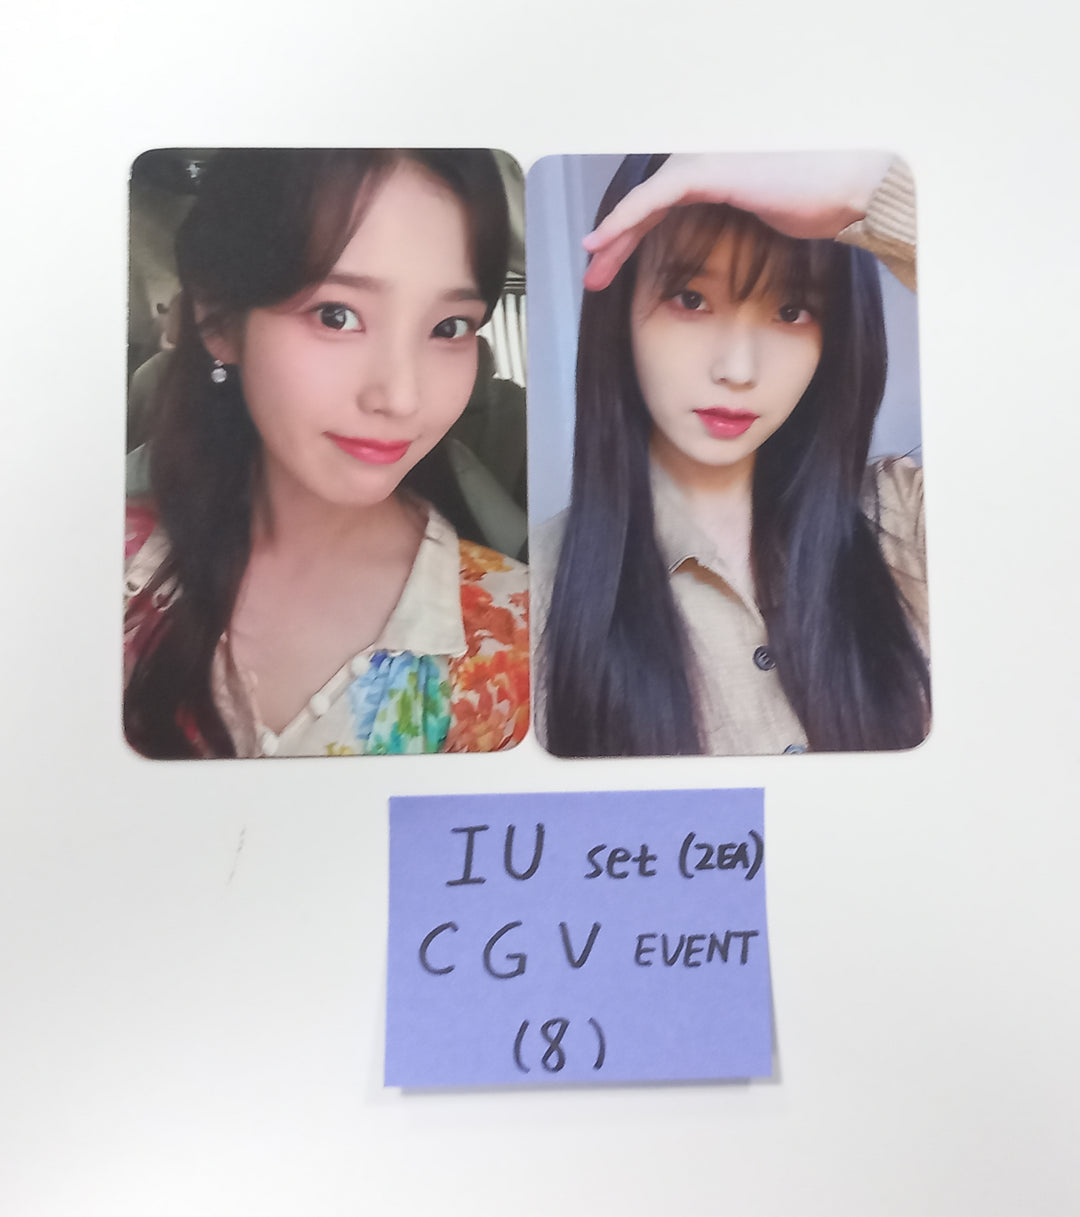 IU "The Golden Hour" - CGV Concert Movie Event Ticket Gift Photocards Set (2EA) Round 2 [23.10.11]